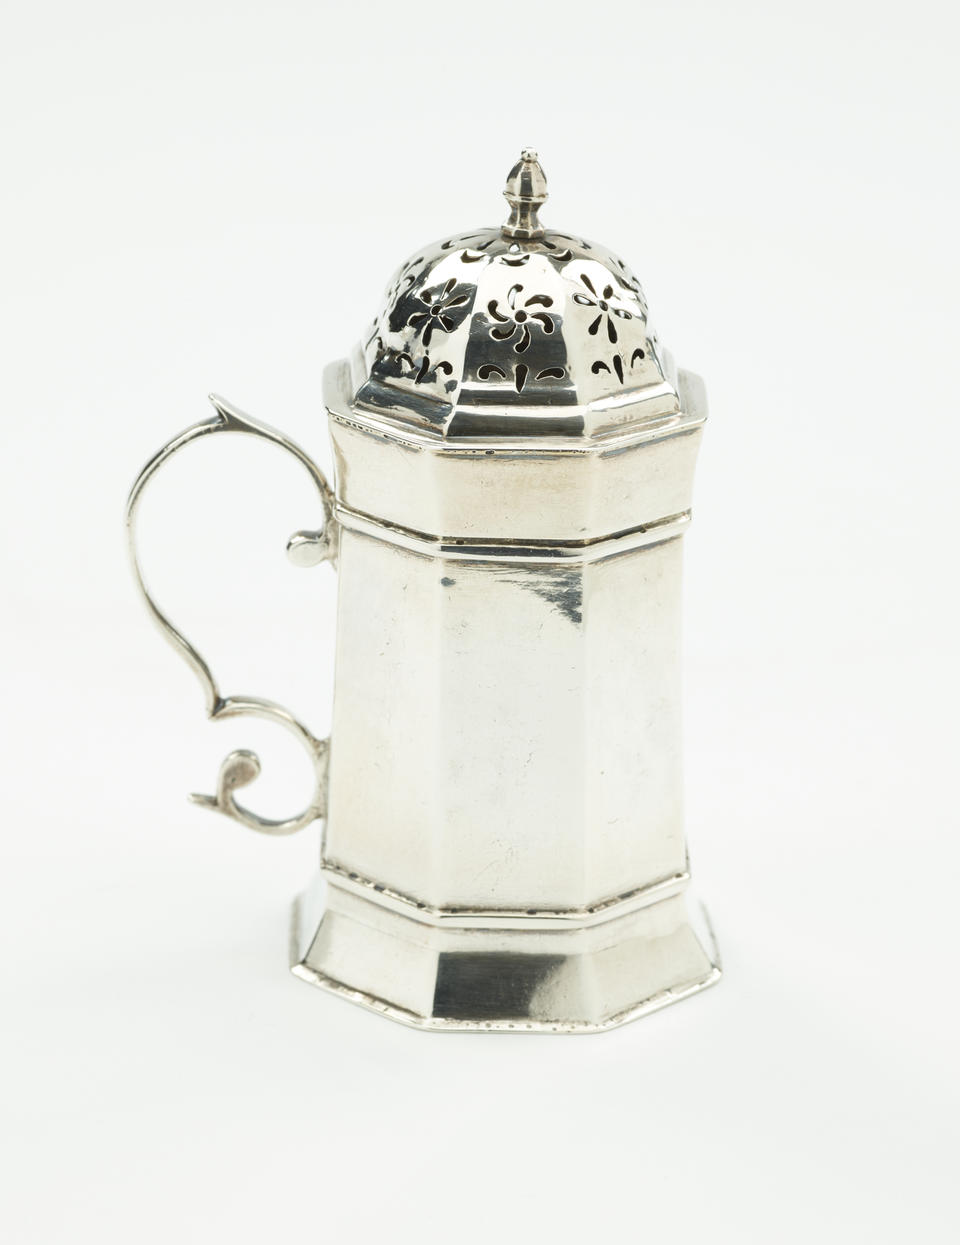 A silver caster that has an octagonal body, handle, and lid that has floral perforations.